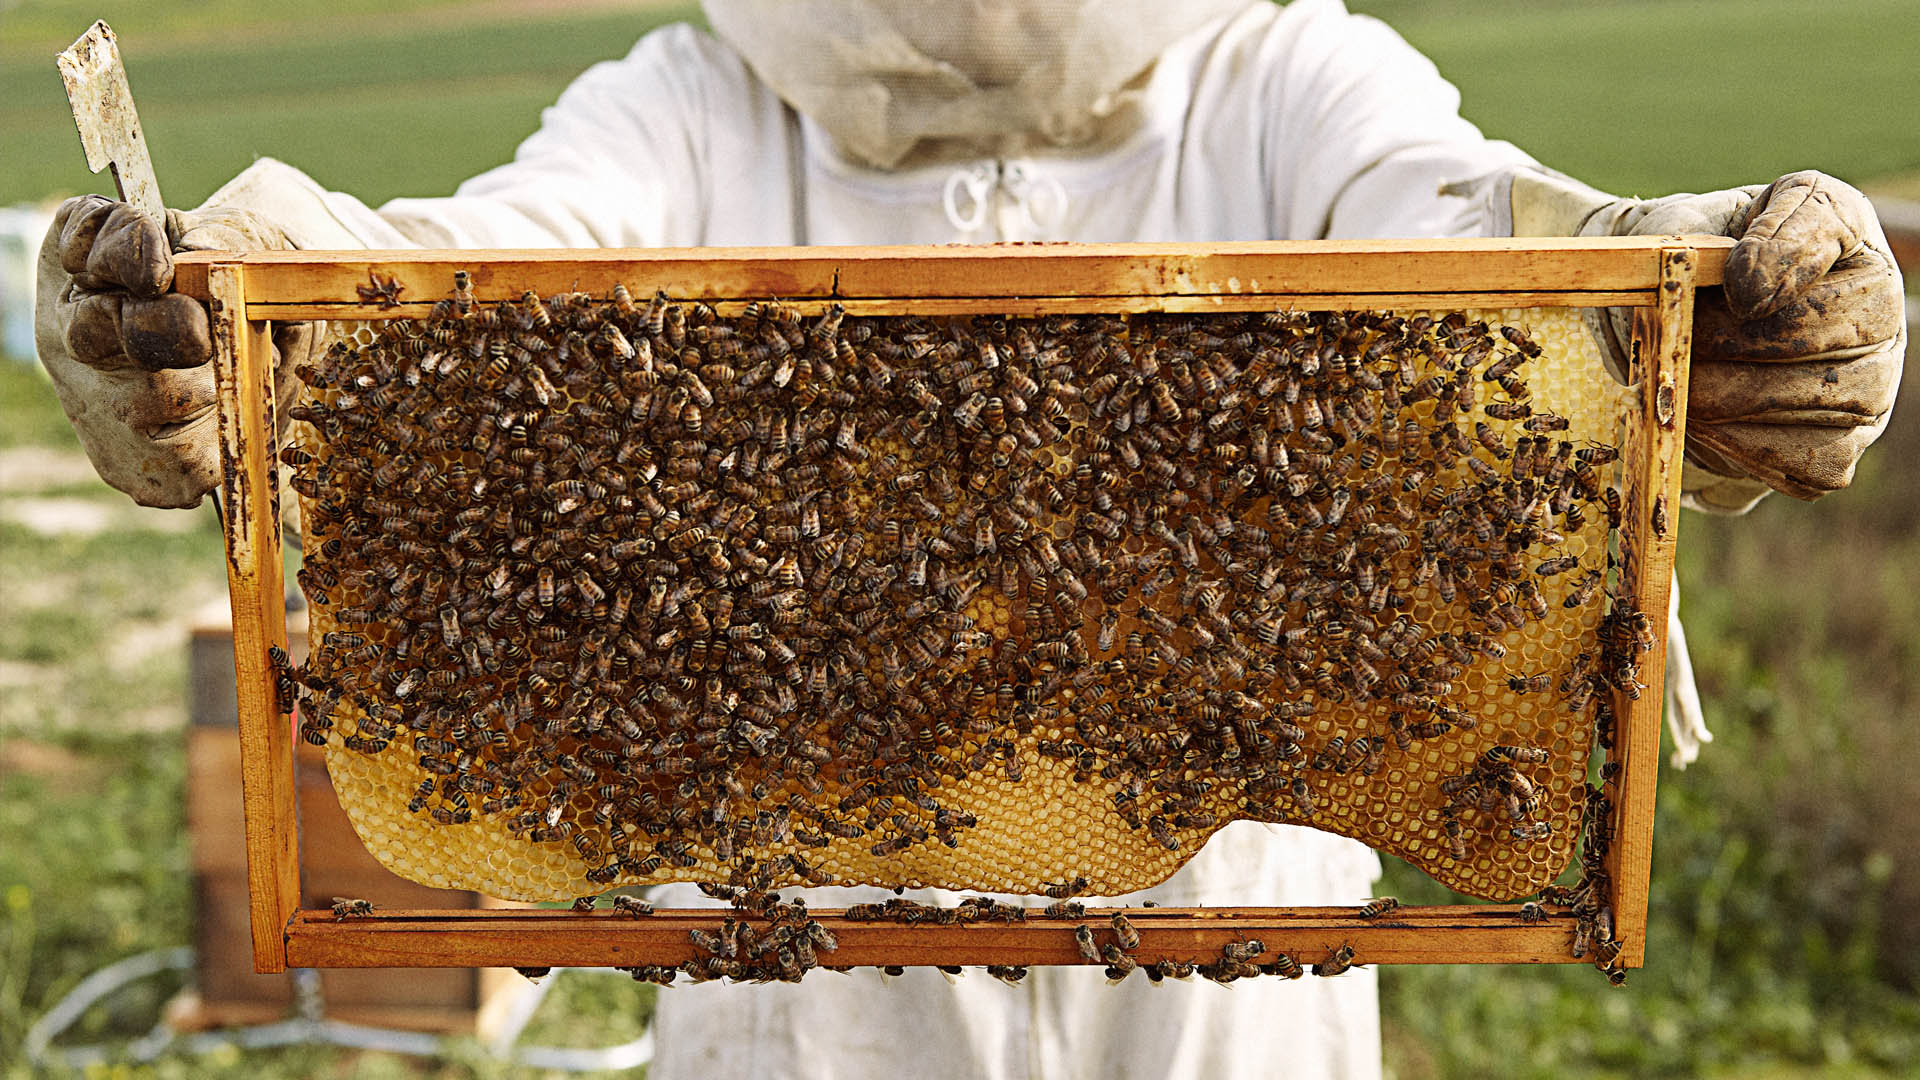 Keep Bees in Your Backyard